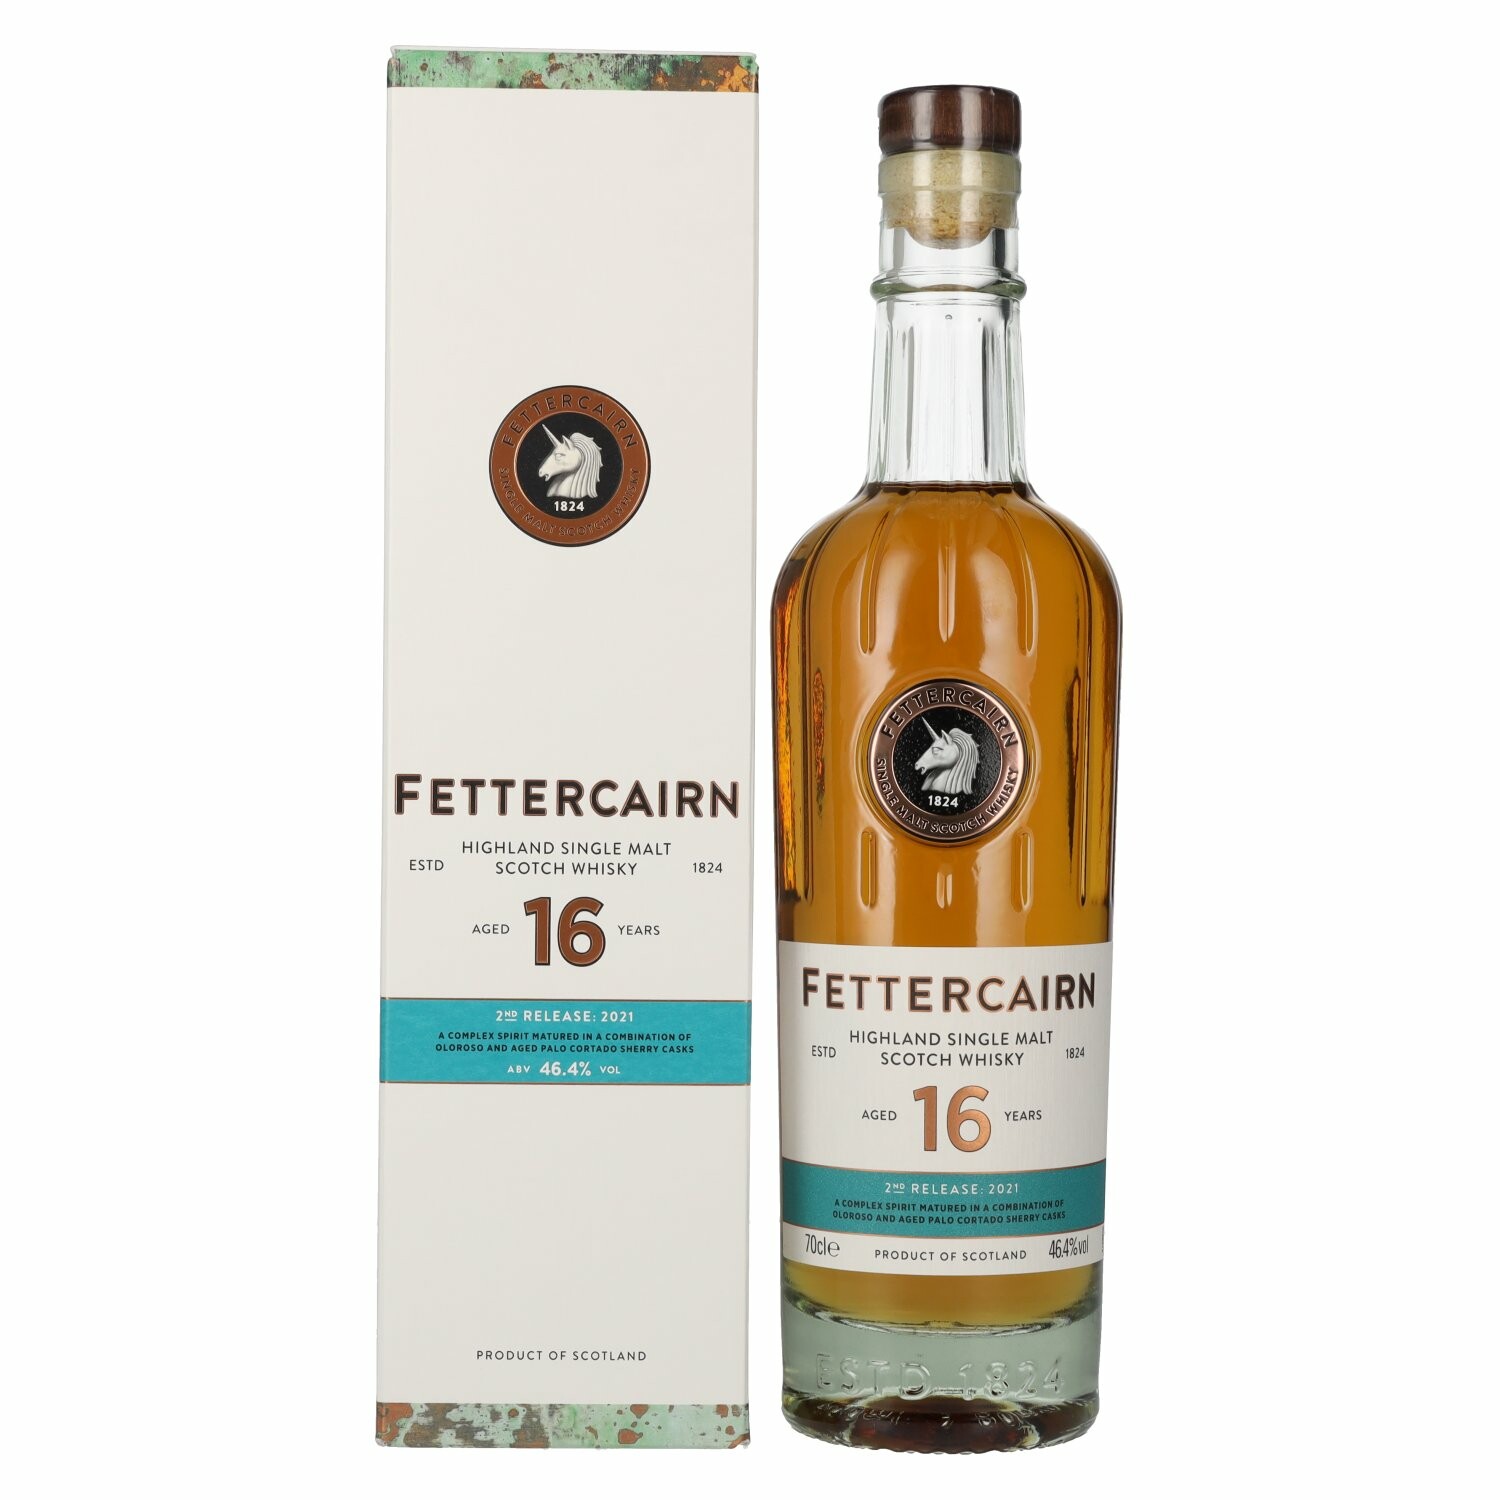 Fettercairn 16 Years Old Highland Single Malt 2nd Release 2021 46,4% Vol. 0,7l in Giftbox